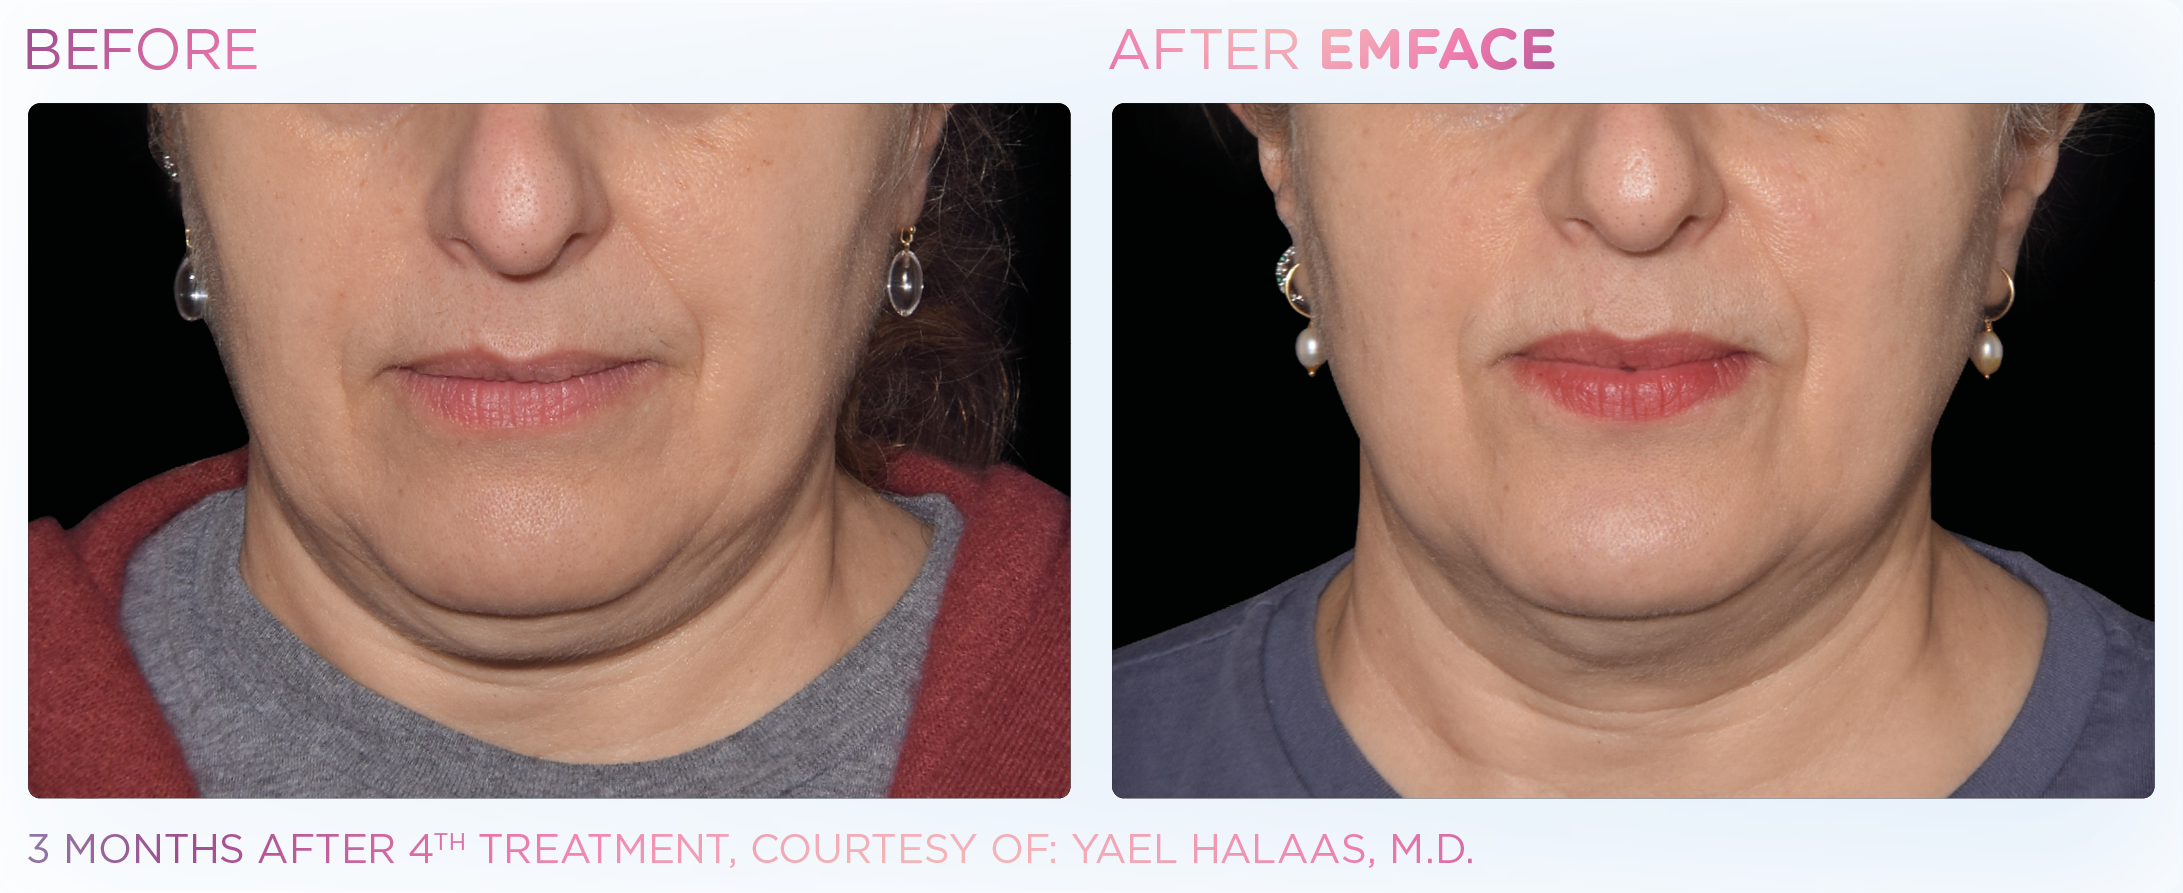 Emface_before-after-6